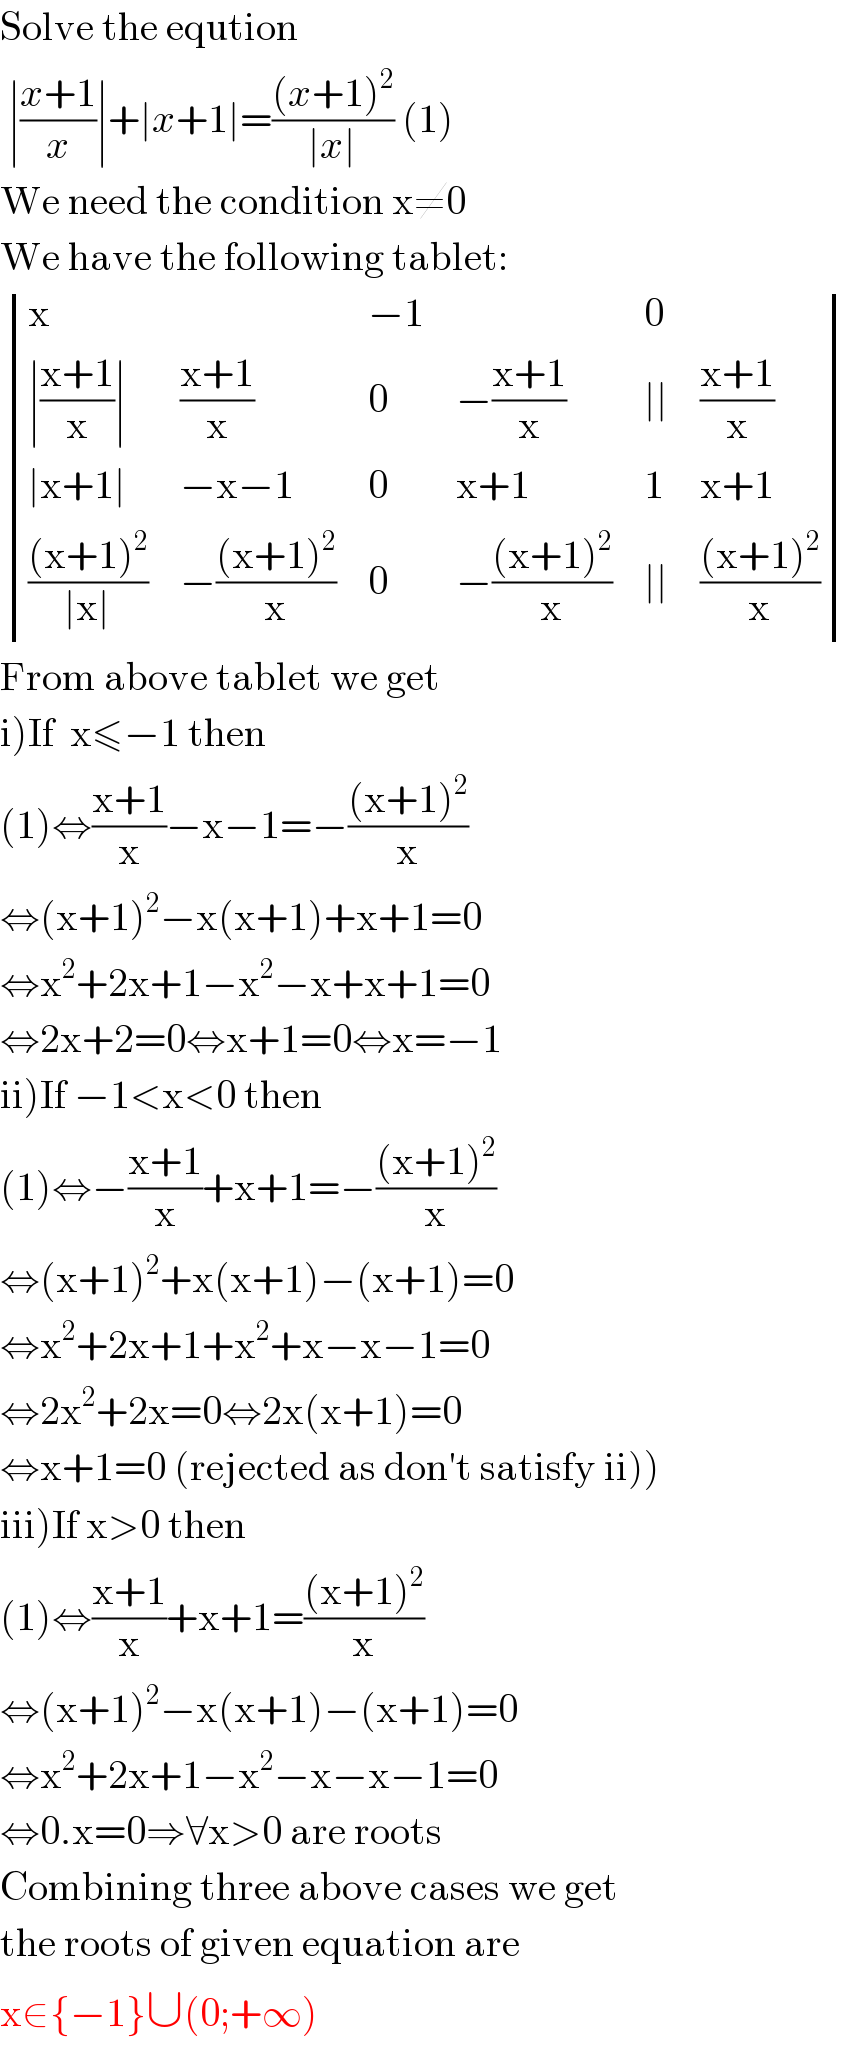 Solve the eqution   ∣((x+1)/x)∣+∣x+1∣=(((x+1)^2 )/(∣x∣)) (1)  We need the condition x≠0  We have the following tablet:   determinant ((x,,(−1),,0,),((∣((x+1)/x)∣),((x+1)/x),0,(−((x+1)/x)),(∣∣),((x+1)/x)),((∣x+1∣),(−x−1),0,(x+1),1,(x+1)),((((x+1)^2 )/(∣x∣)),(−(((x+1)^2 )/x)),0,(−(((x+1)^2 )/x)),(∣∣),(((x+1)^2 )/x)))  From above tablet we get  i)If  x≤−1 then  (1)⇔((x+1)/x)−x−1=−(((x+1)^2 )/x)  ⇔(x+1)^2 −x(x+1)+x+1=0  ⇔x^2 +2x+1−x^2 −x+x+1=0  ⇔2x+2=0⇔x+1=0⇔x=−1  ii)If −1<x<0 then  (1)⇔−((x+1)/x)+x+1=−(((x+1)^2 )/x)  ⇔(x+1)^2 +x(x+1)−(x+1)=0  ⇔x^2 +2x+1+x^2 +x−x−1=0  ⇔2x^2 +2x=0⇔2x(x+1)=0  ⇔x+1=0 (rejected as don′t satisfy ii))  iii)If x>0 then  (1)⇔((x+1)/x)+x+1=(((x+1)^2 )/x)  ⇔(x+1)^2 −x(x+1)−(x+1)=0  ⇔x^2 +2x+1−x^2 −x−x−1=0  ⇔0.x=0⇒∀x>0 are roots  Combining three above cases we get  the roots of given equation are  x∈{−1}∪(0;+∞)  